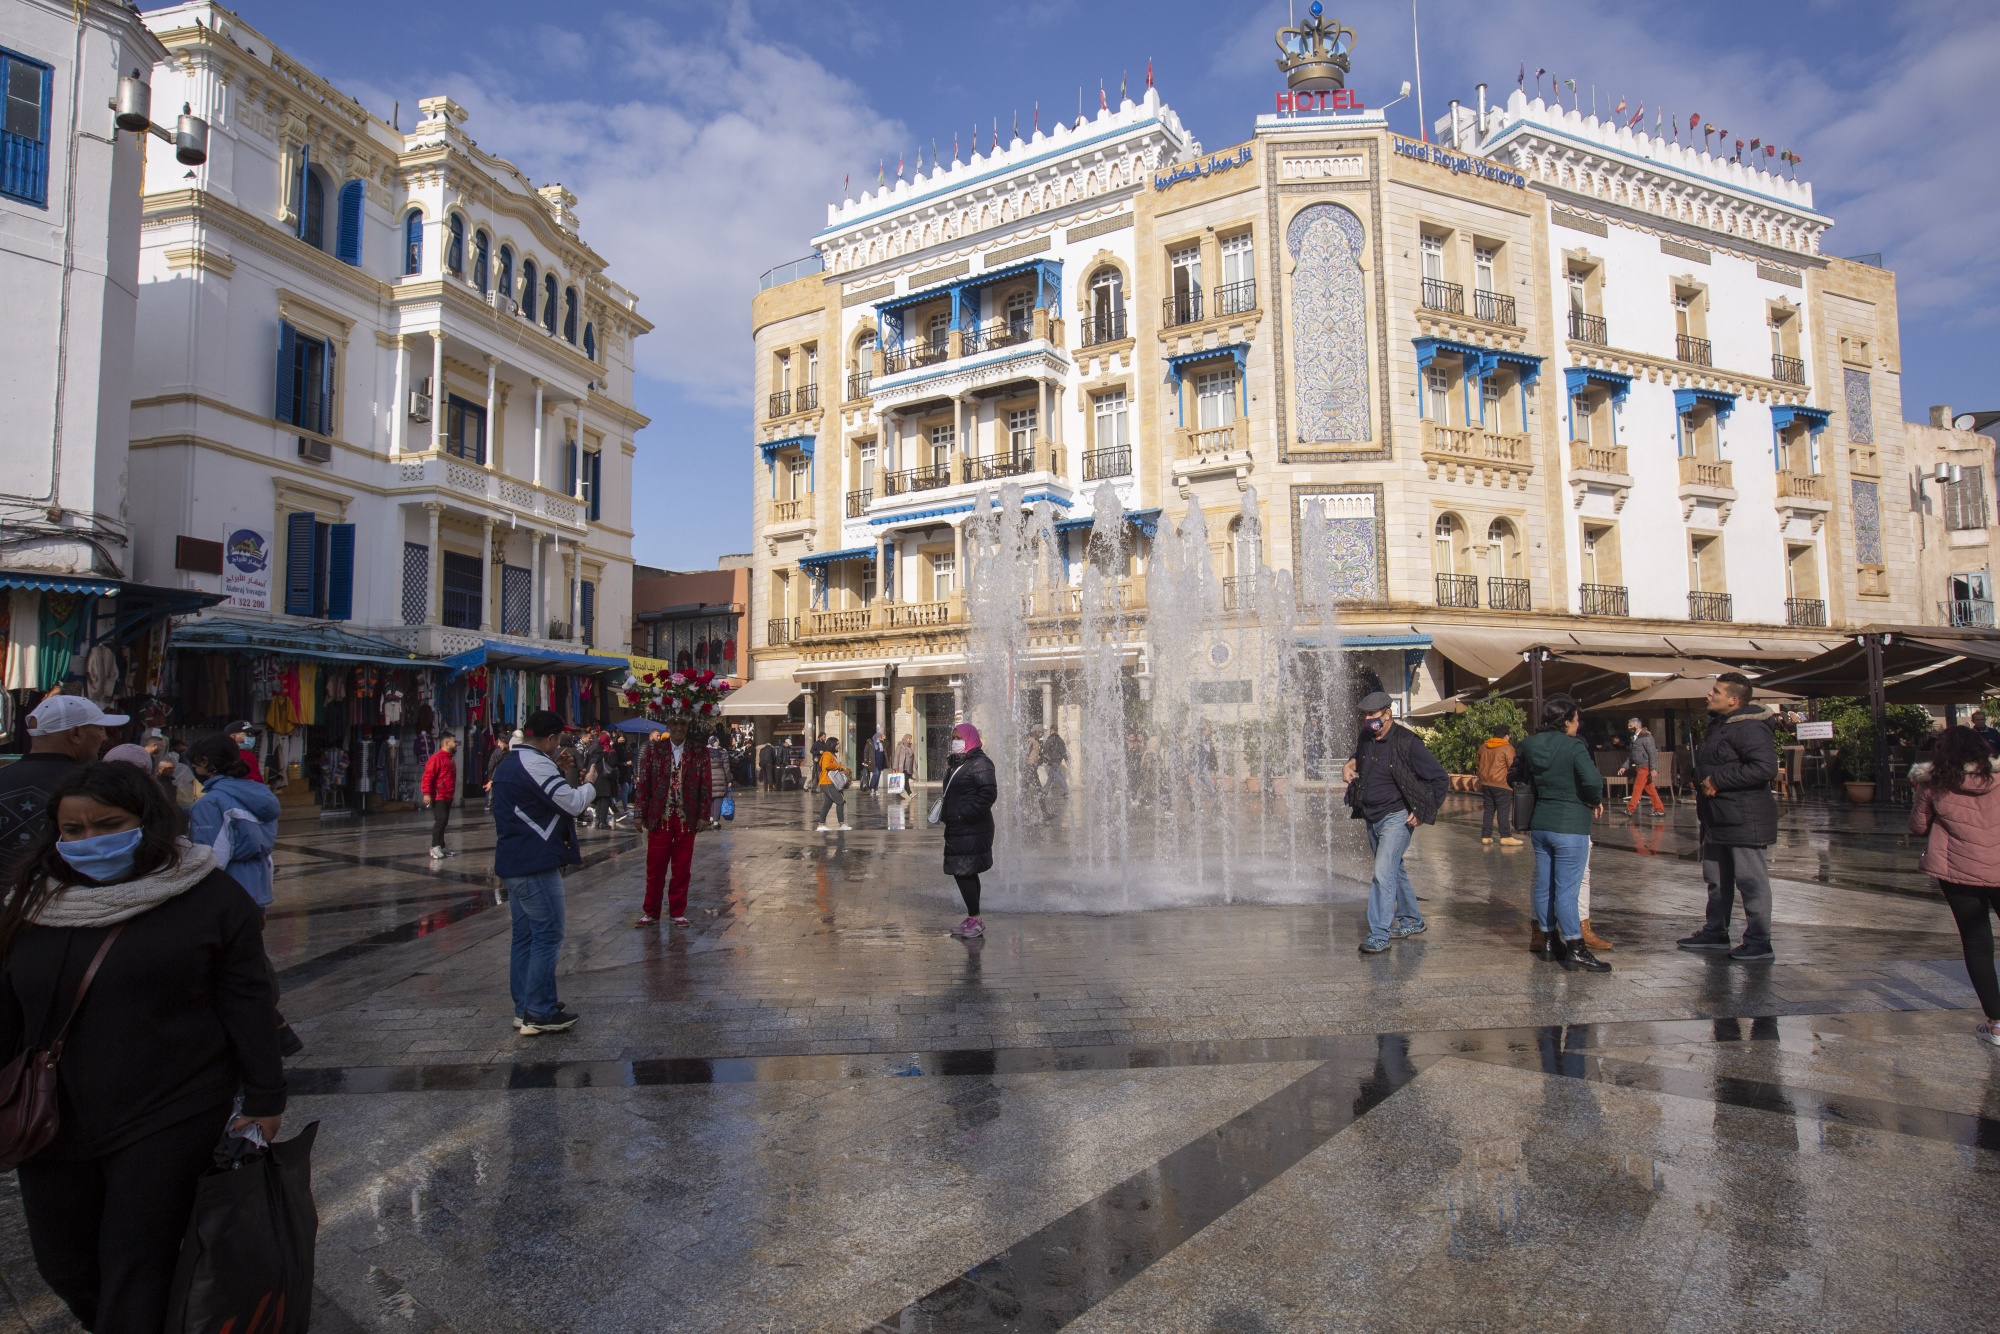 Daily Life And Economy in Tunisia's Capital